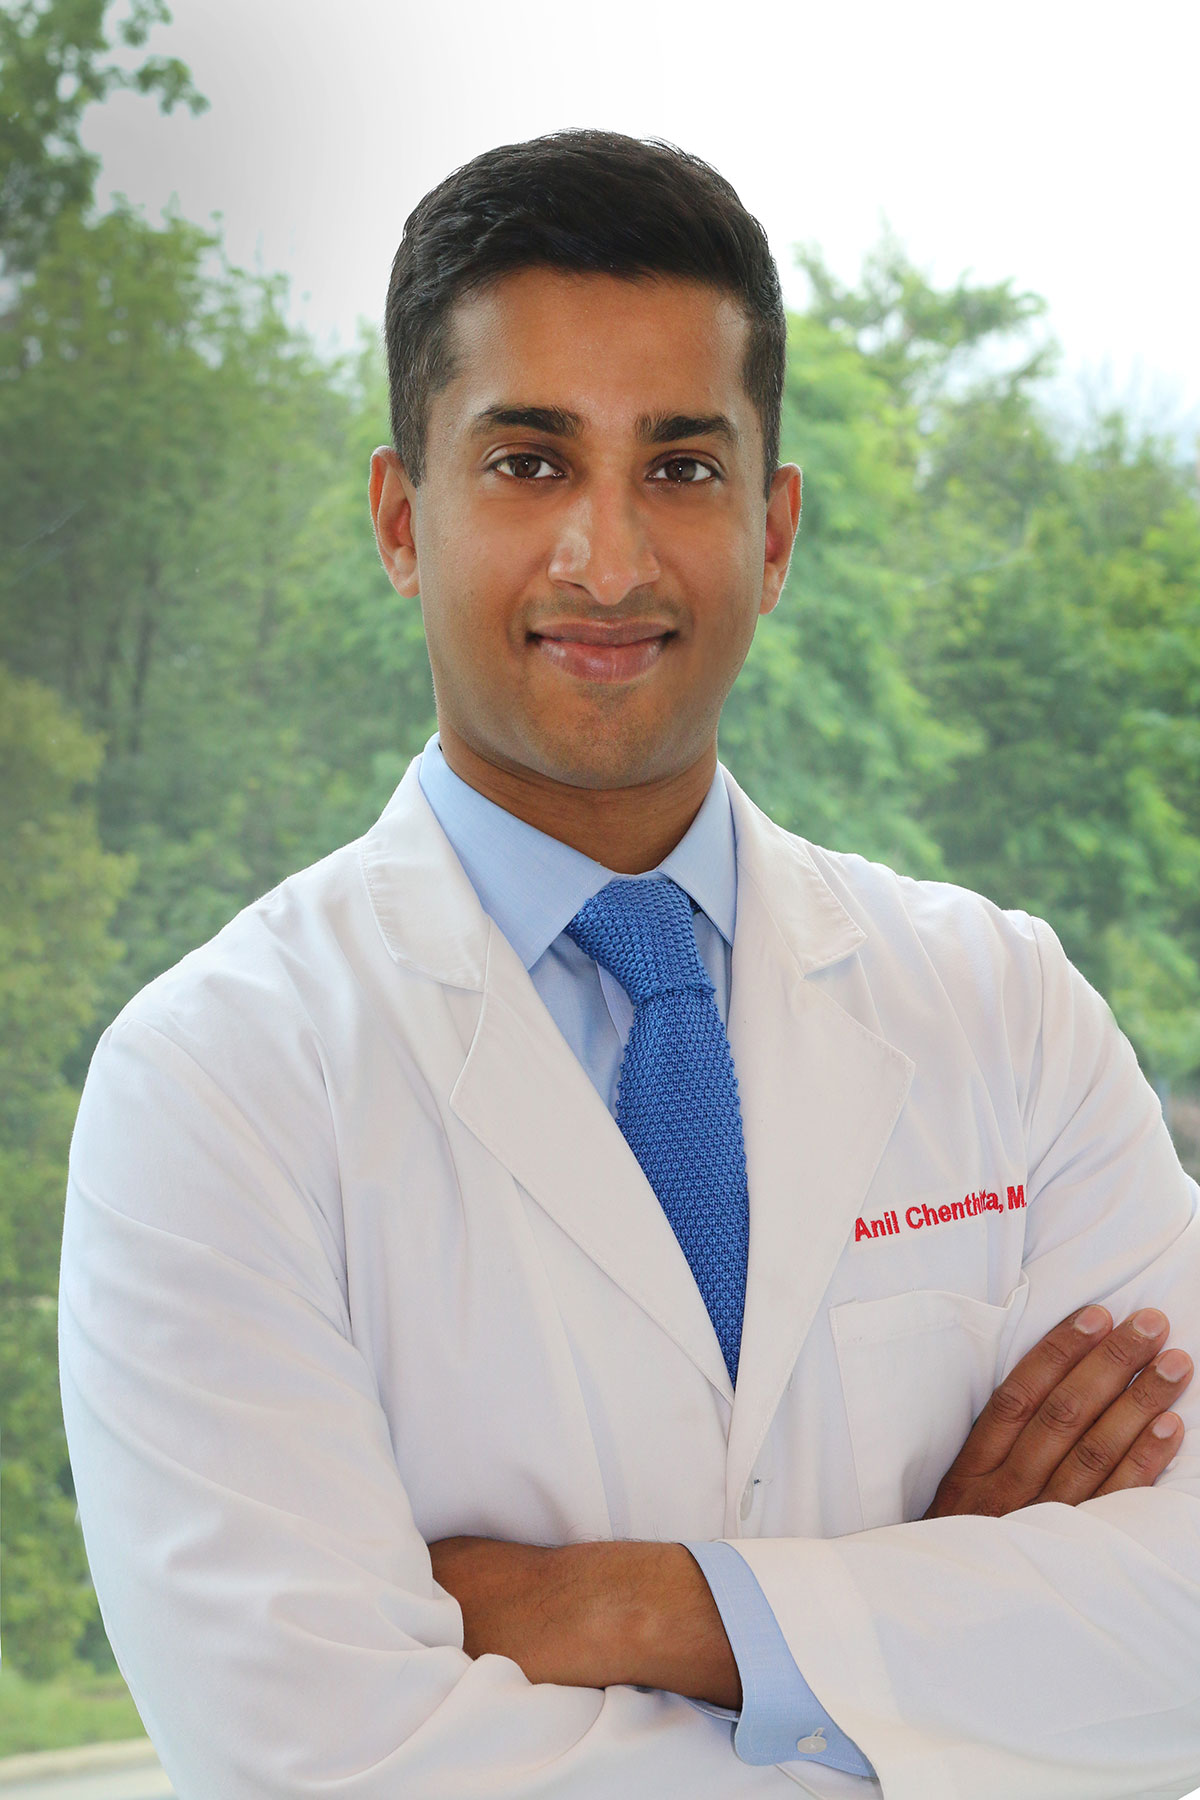 A Portrait of Dr. Anil Chenthitta, Chronic Pain Doctor